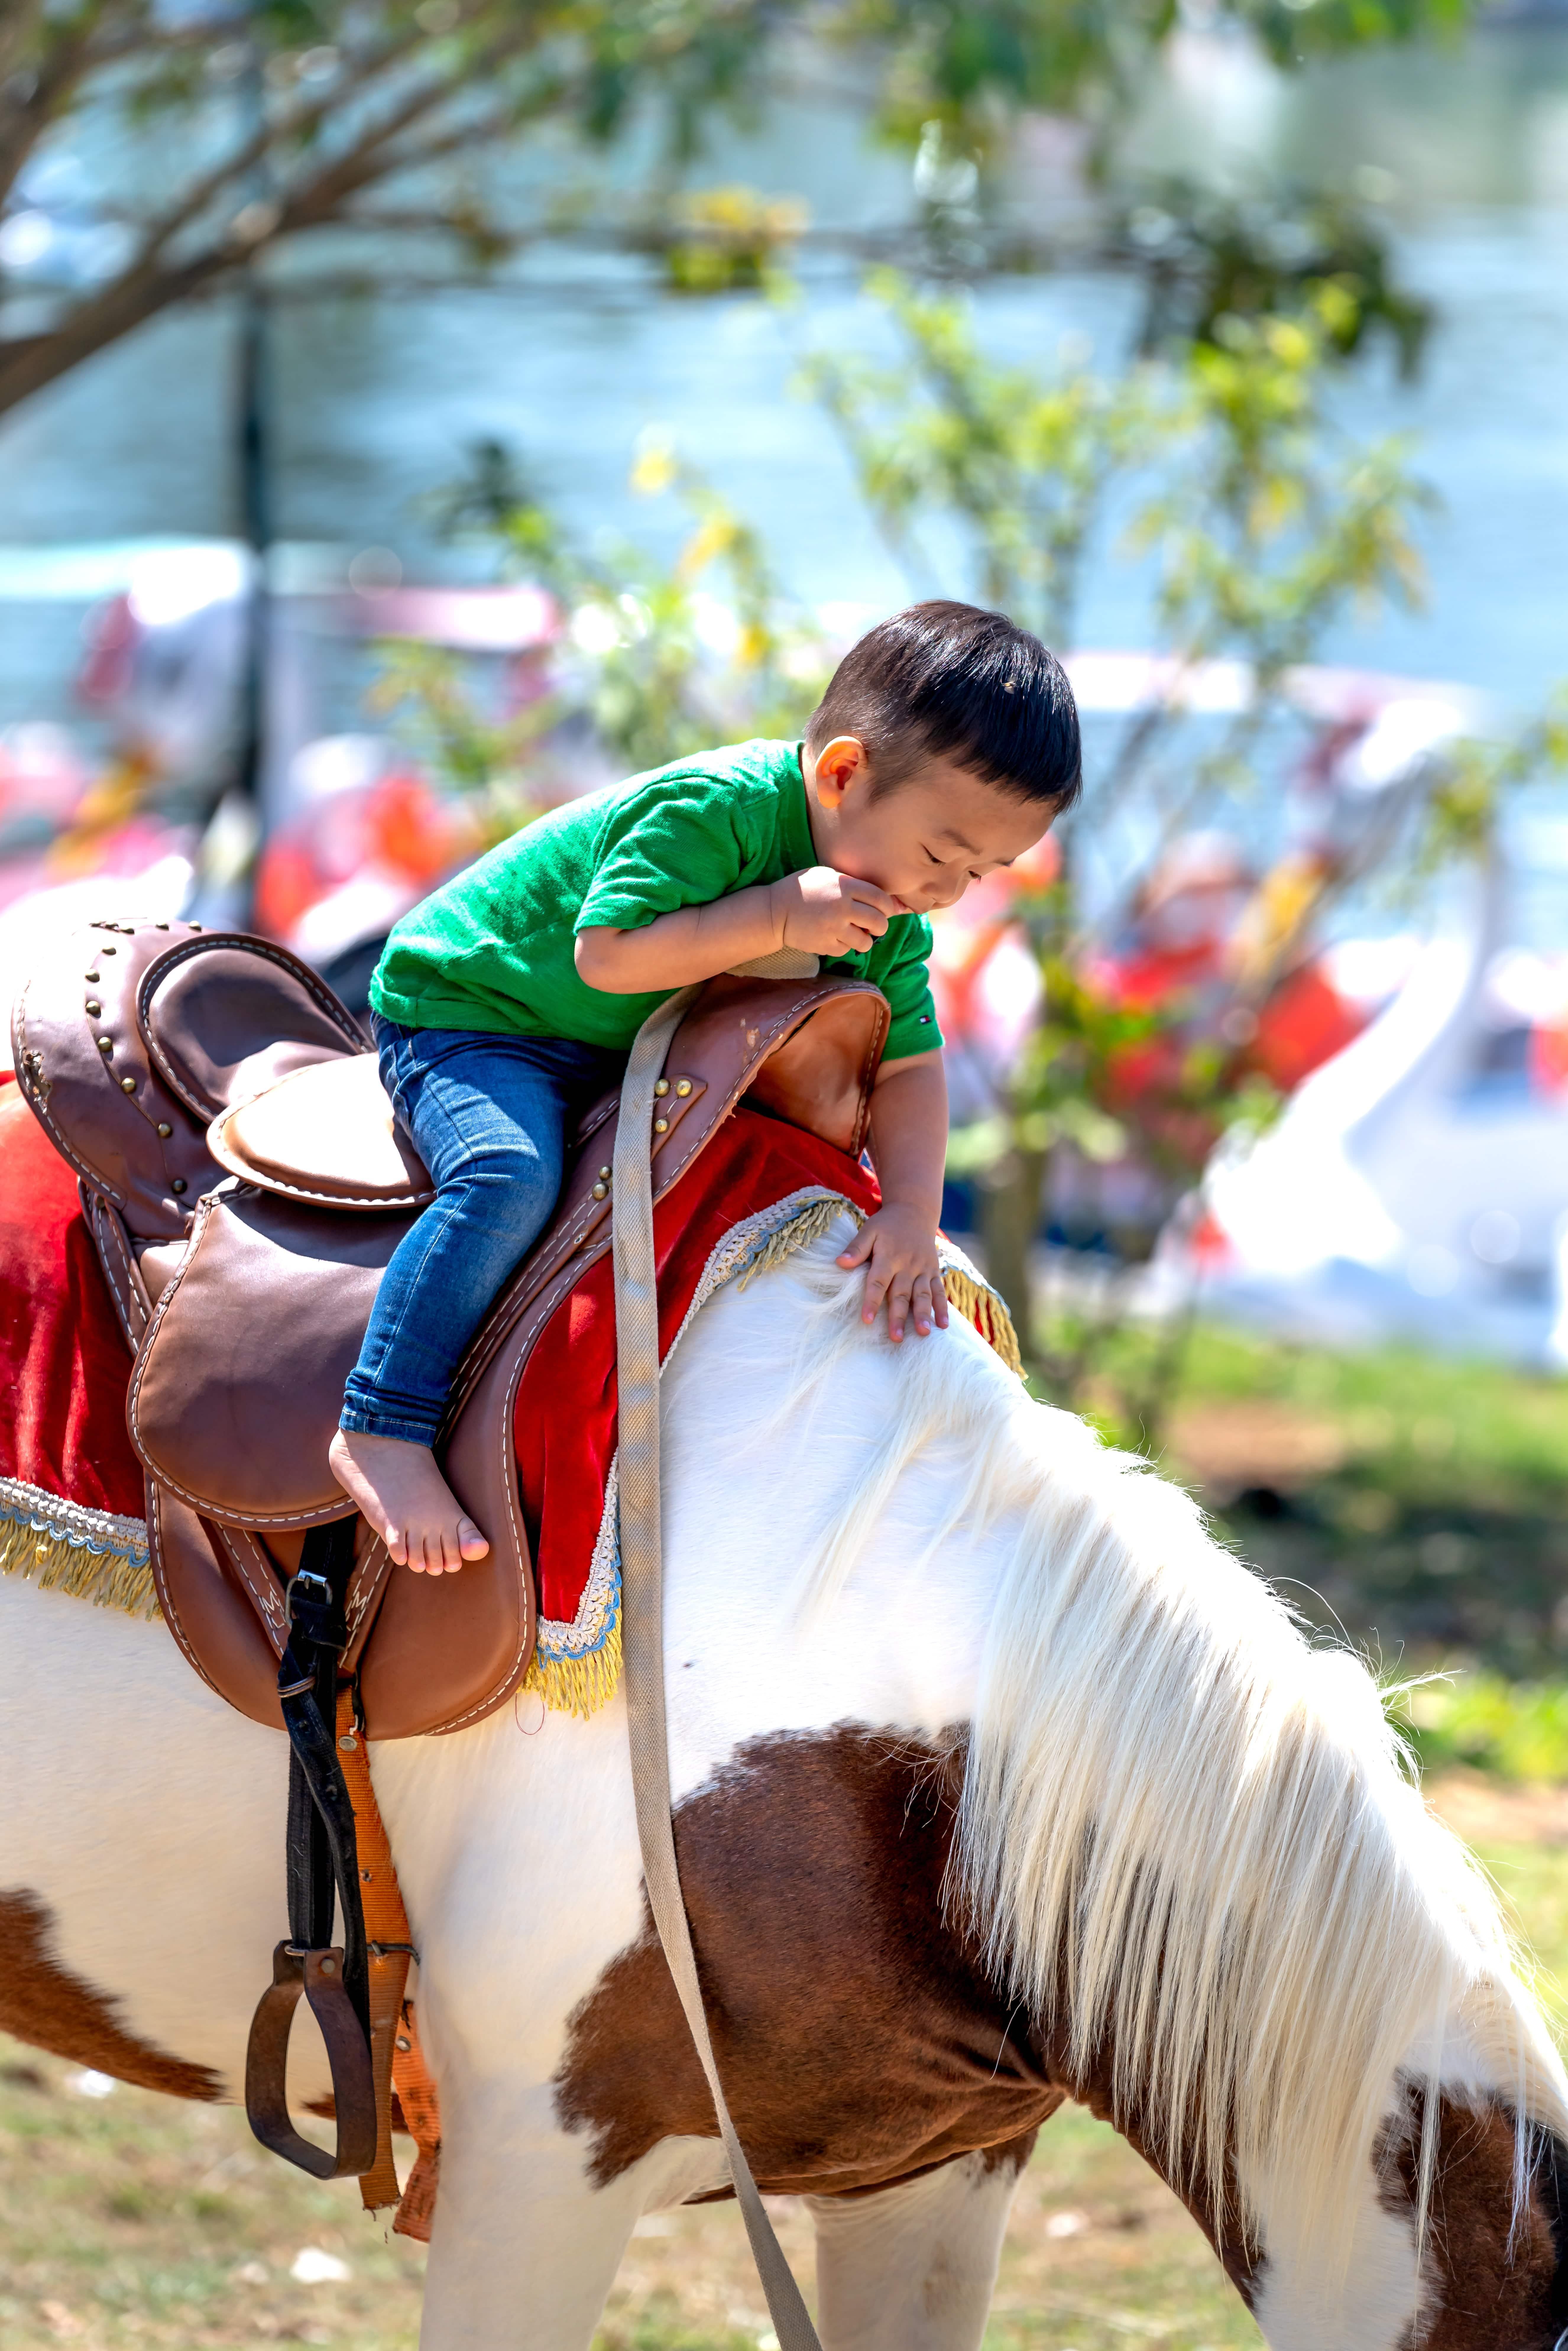 A small child riding a horse, leaning over to pet its neck